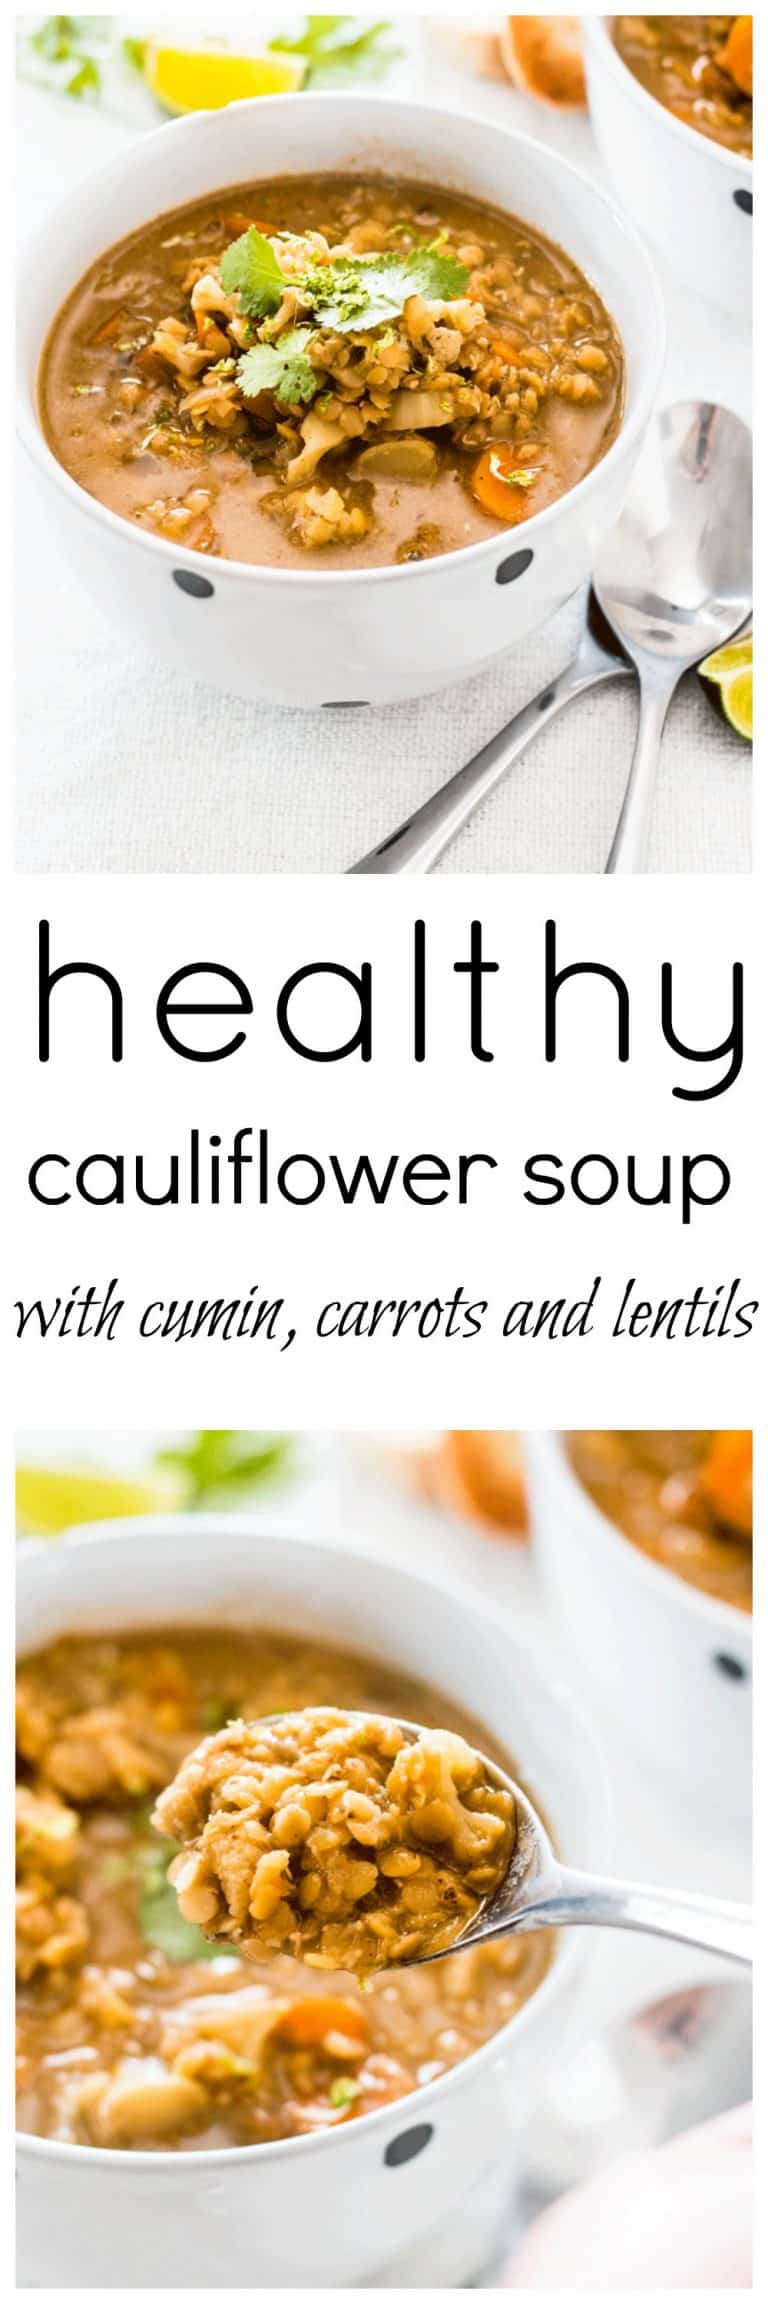 Healthy Cauliflower Soup with Carrot Cumin and Lentils - Whole Food Bellies